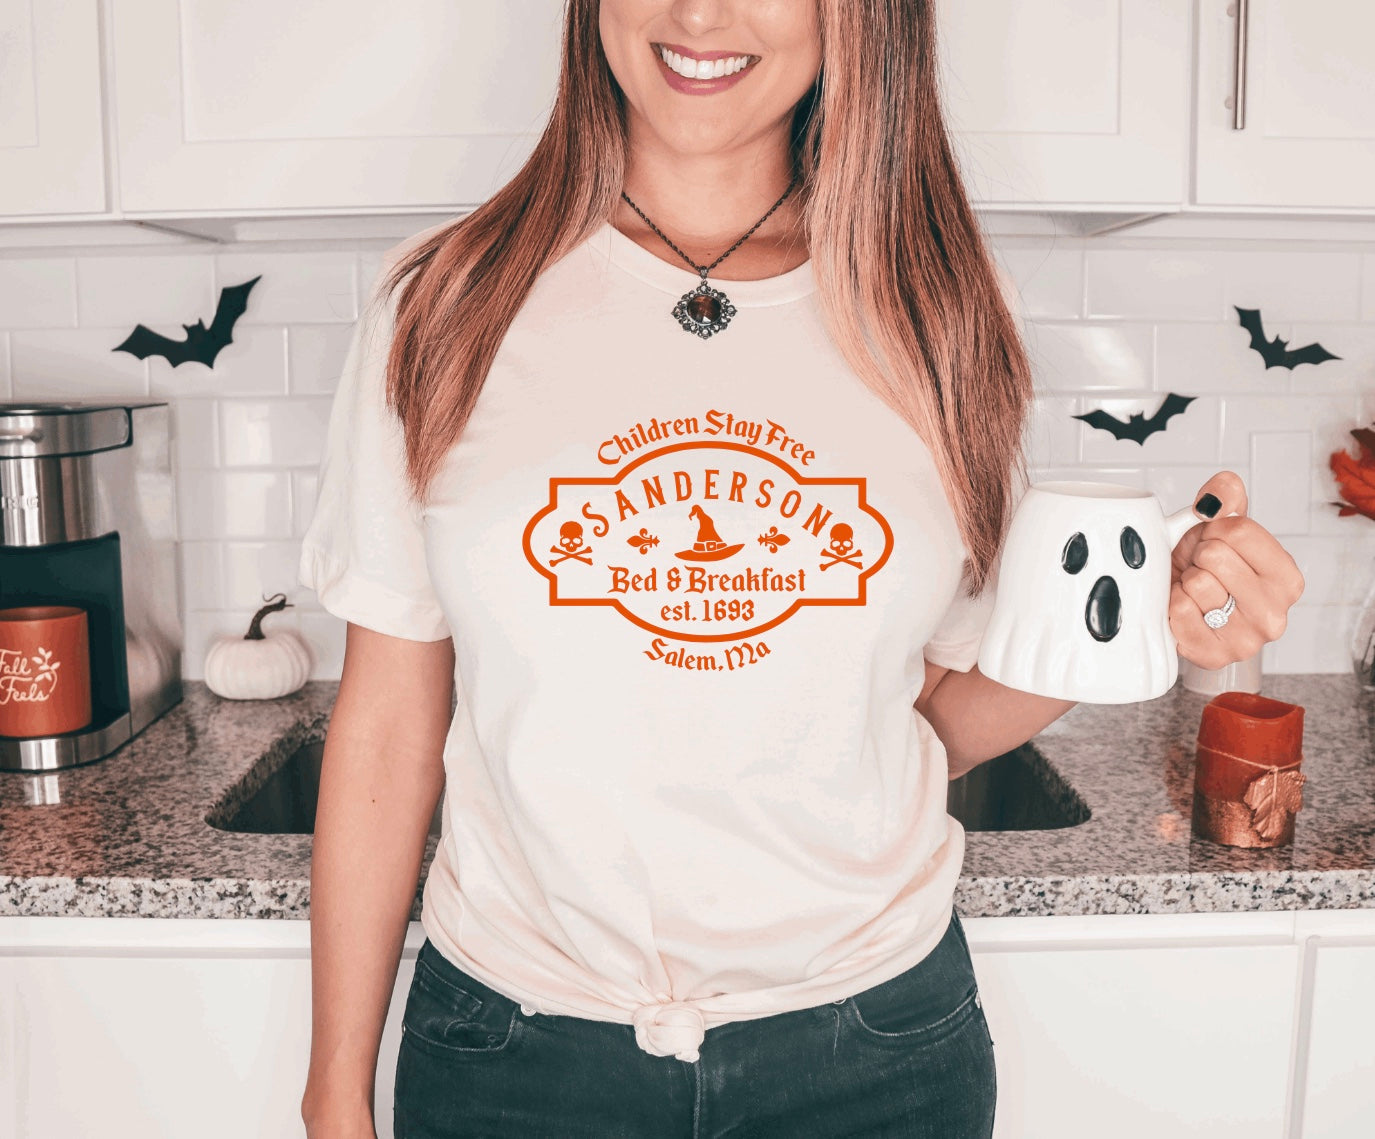 Sanderson bed and breakfast t-shirt 